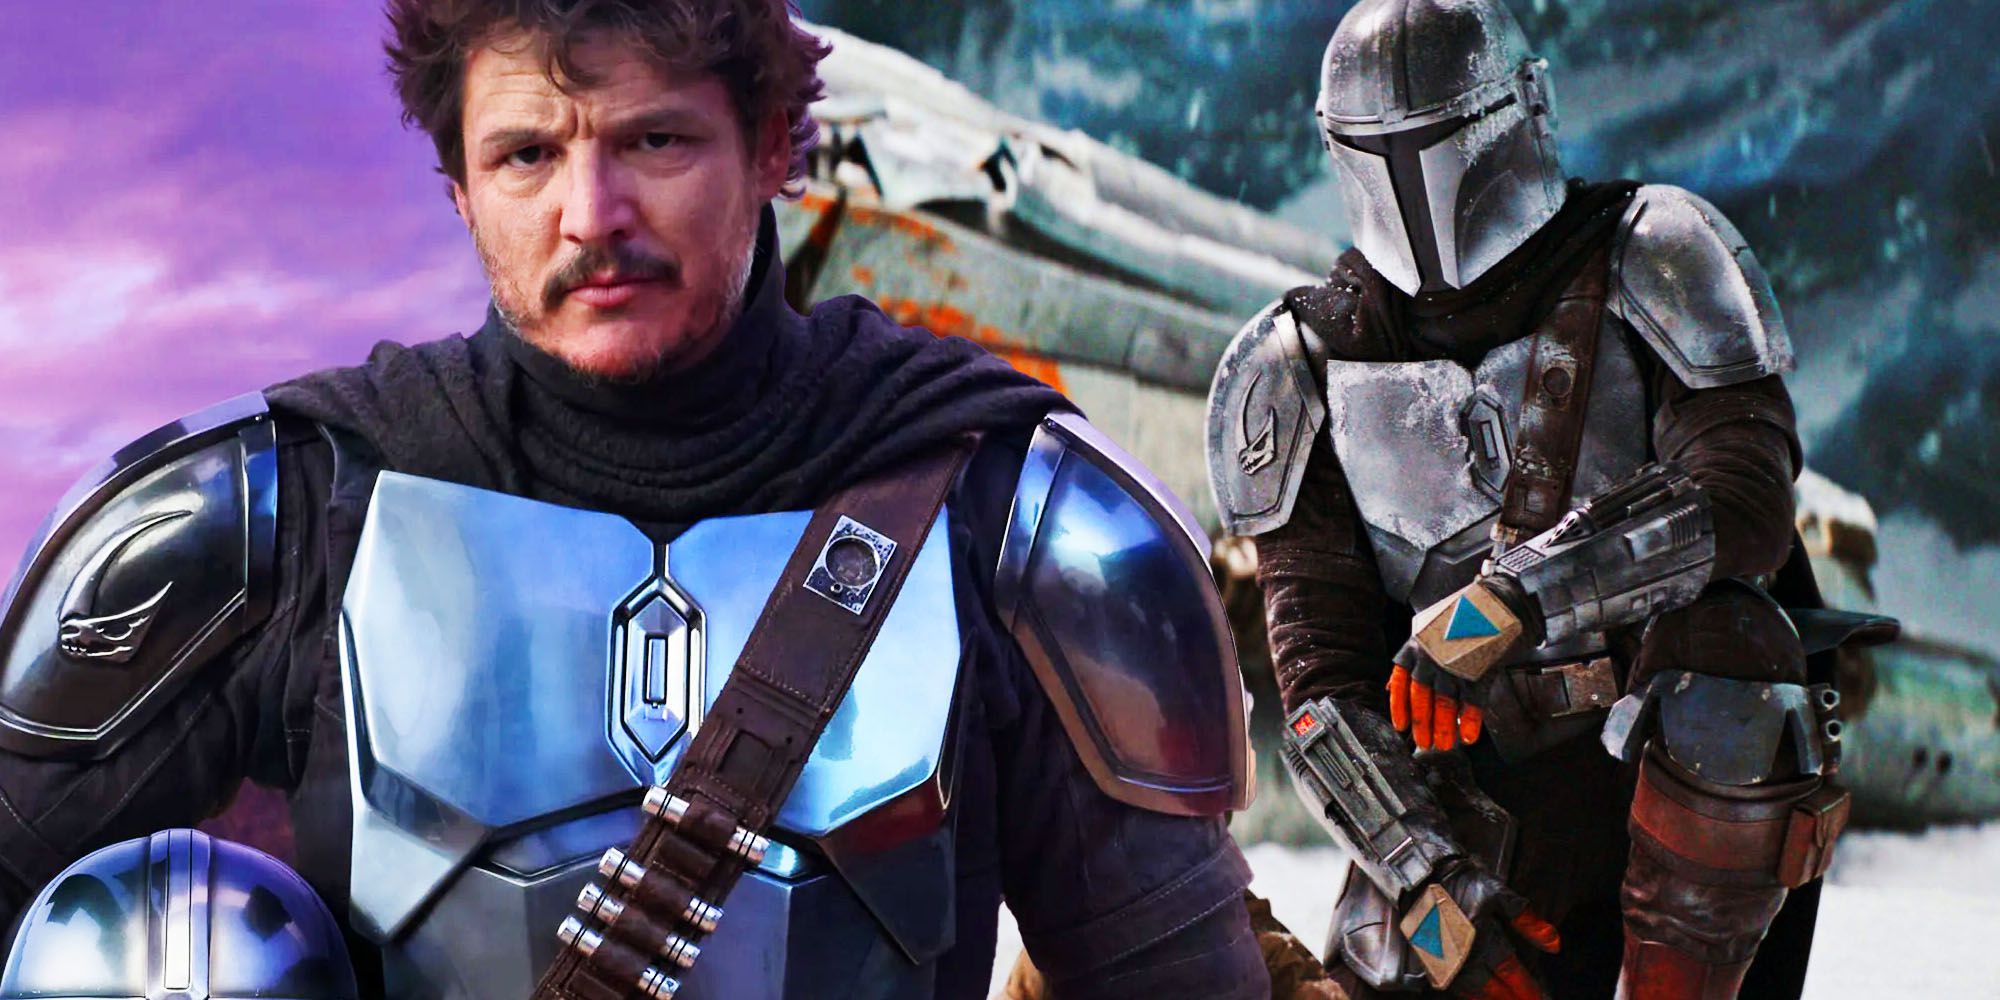 The Mandalorian Cast & Characters Guide